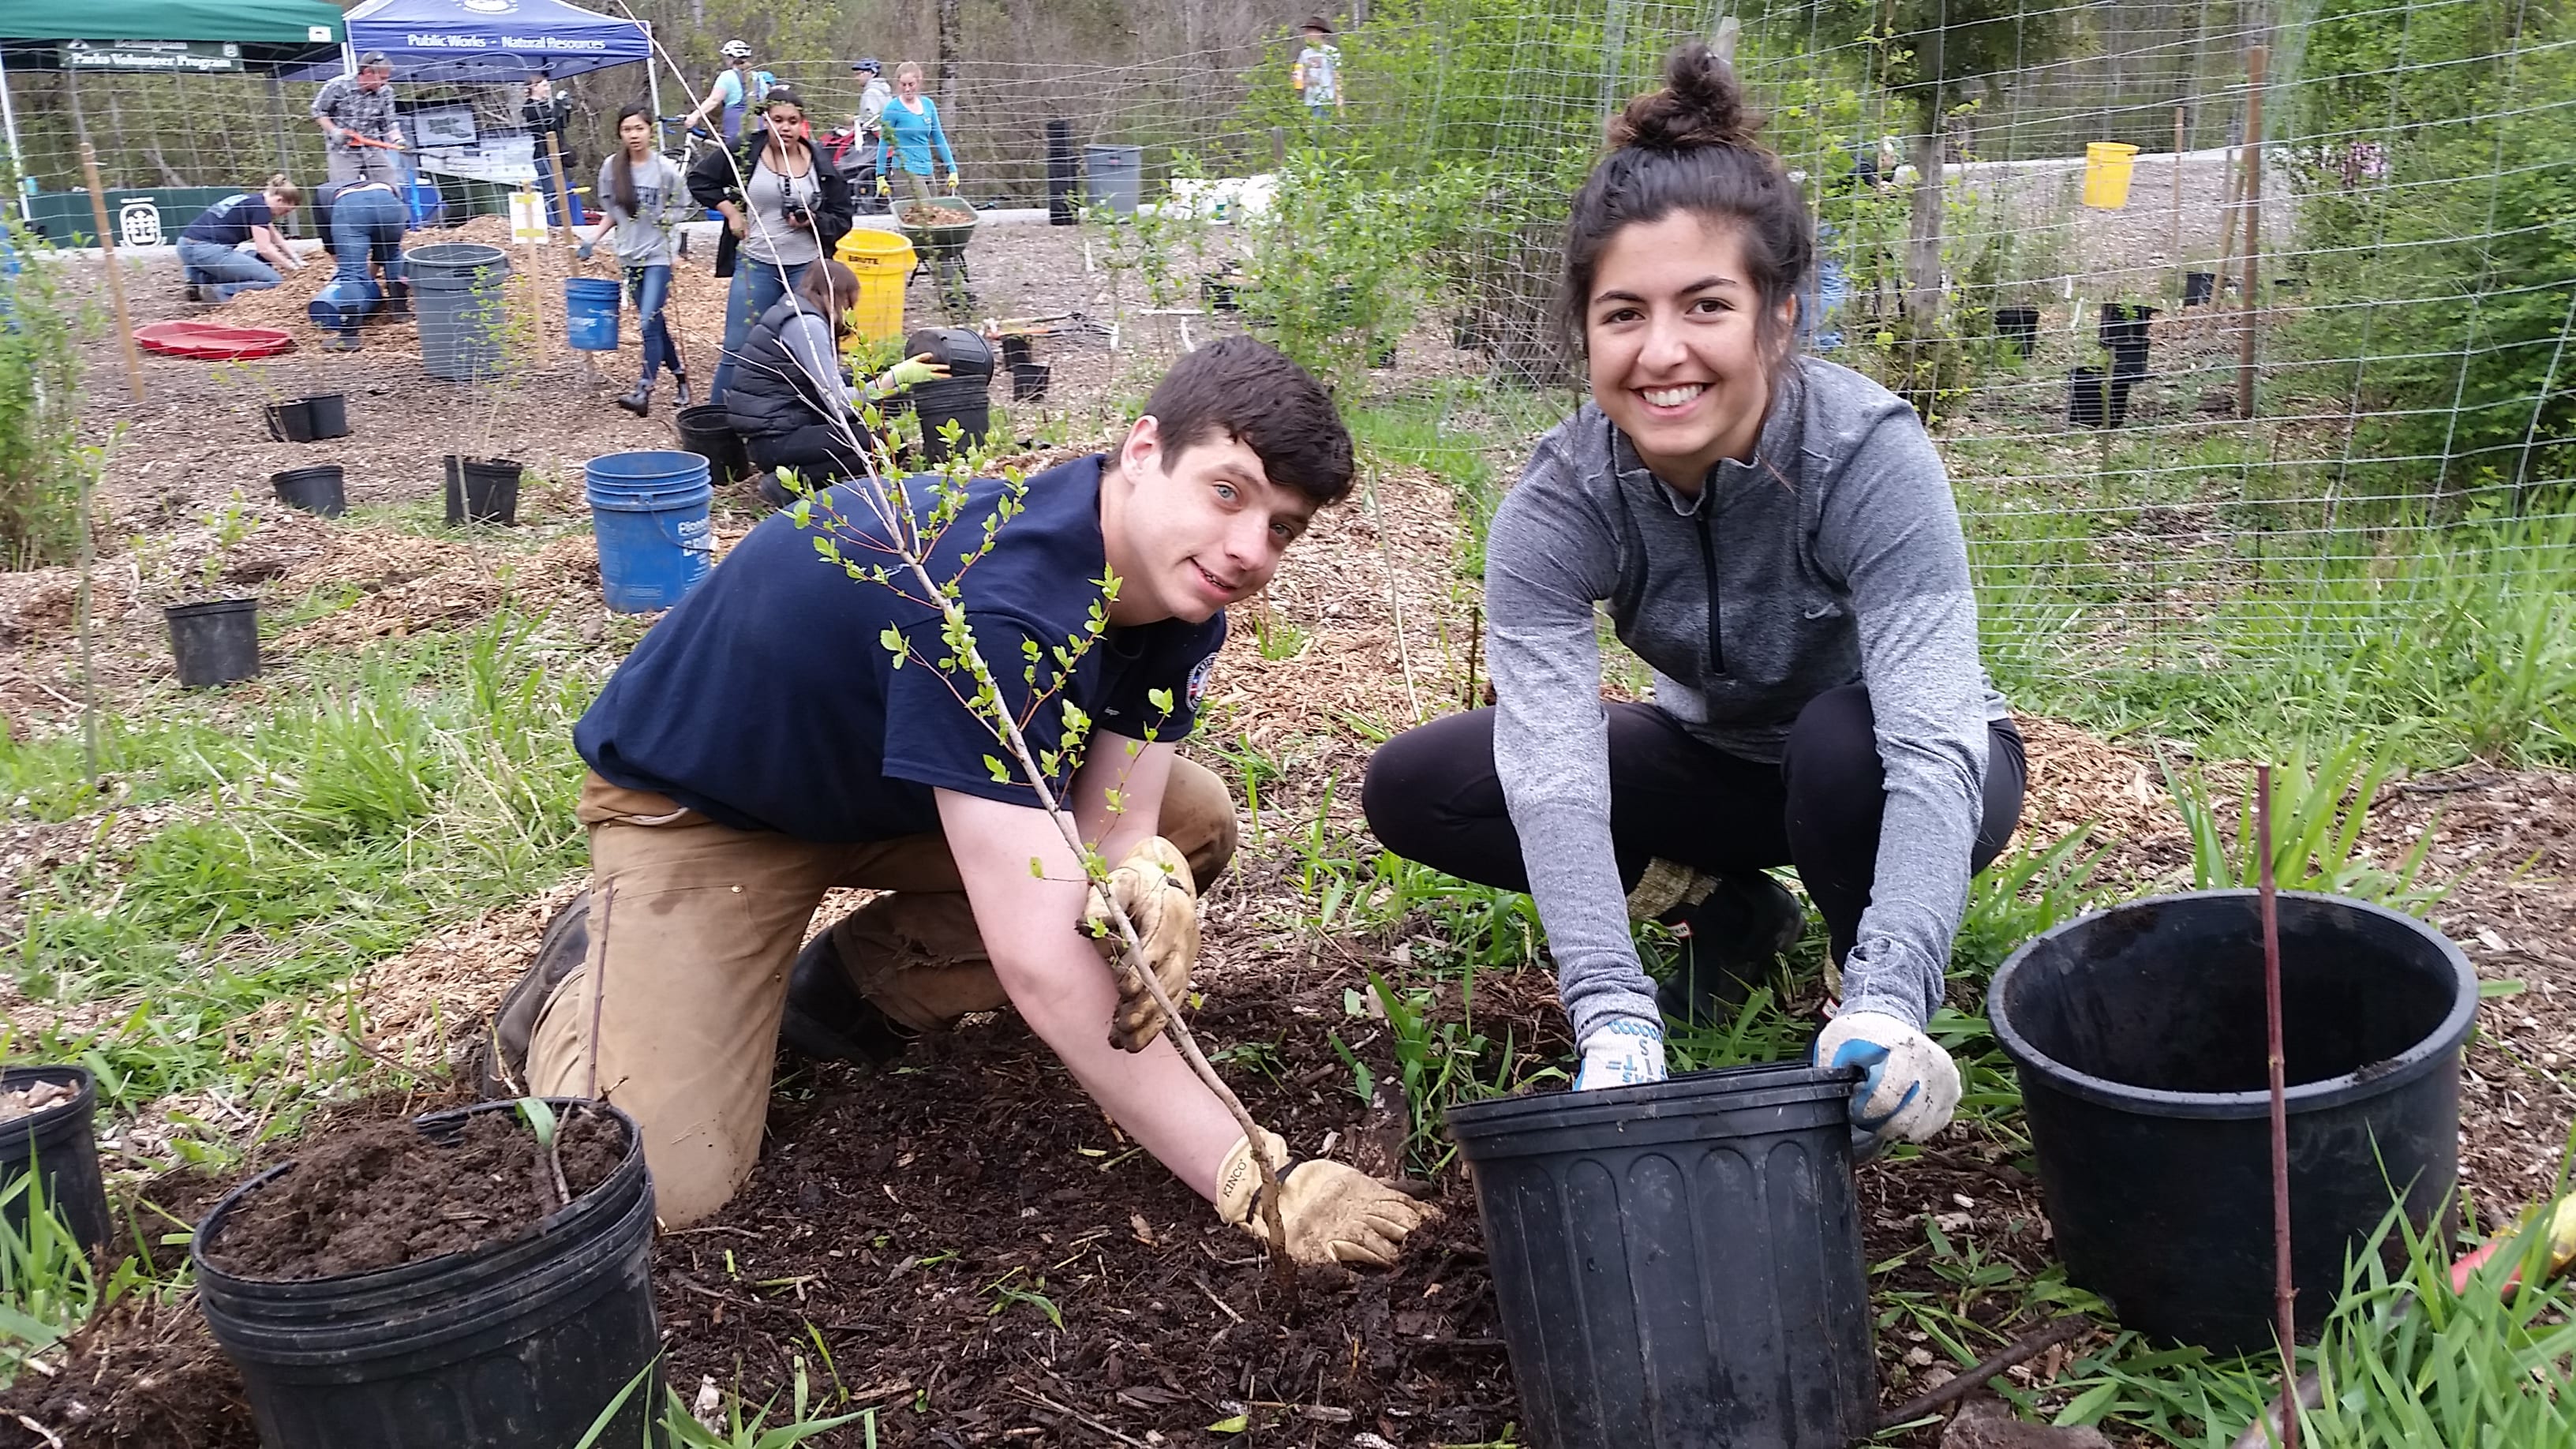 Two volunteers planting a tree together